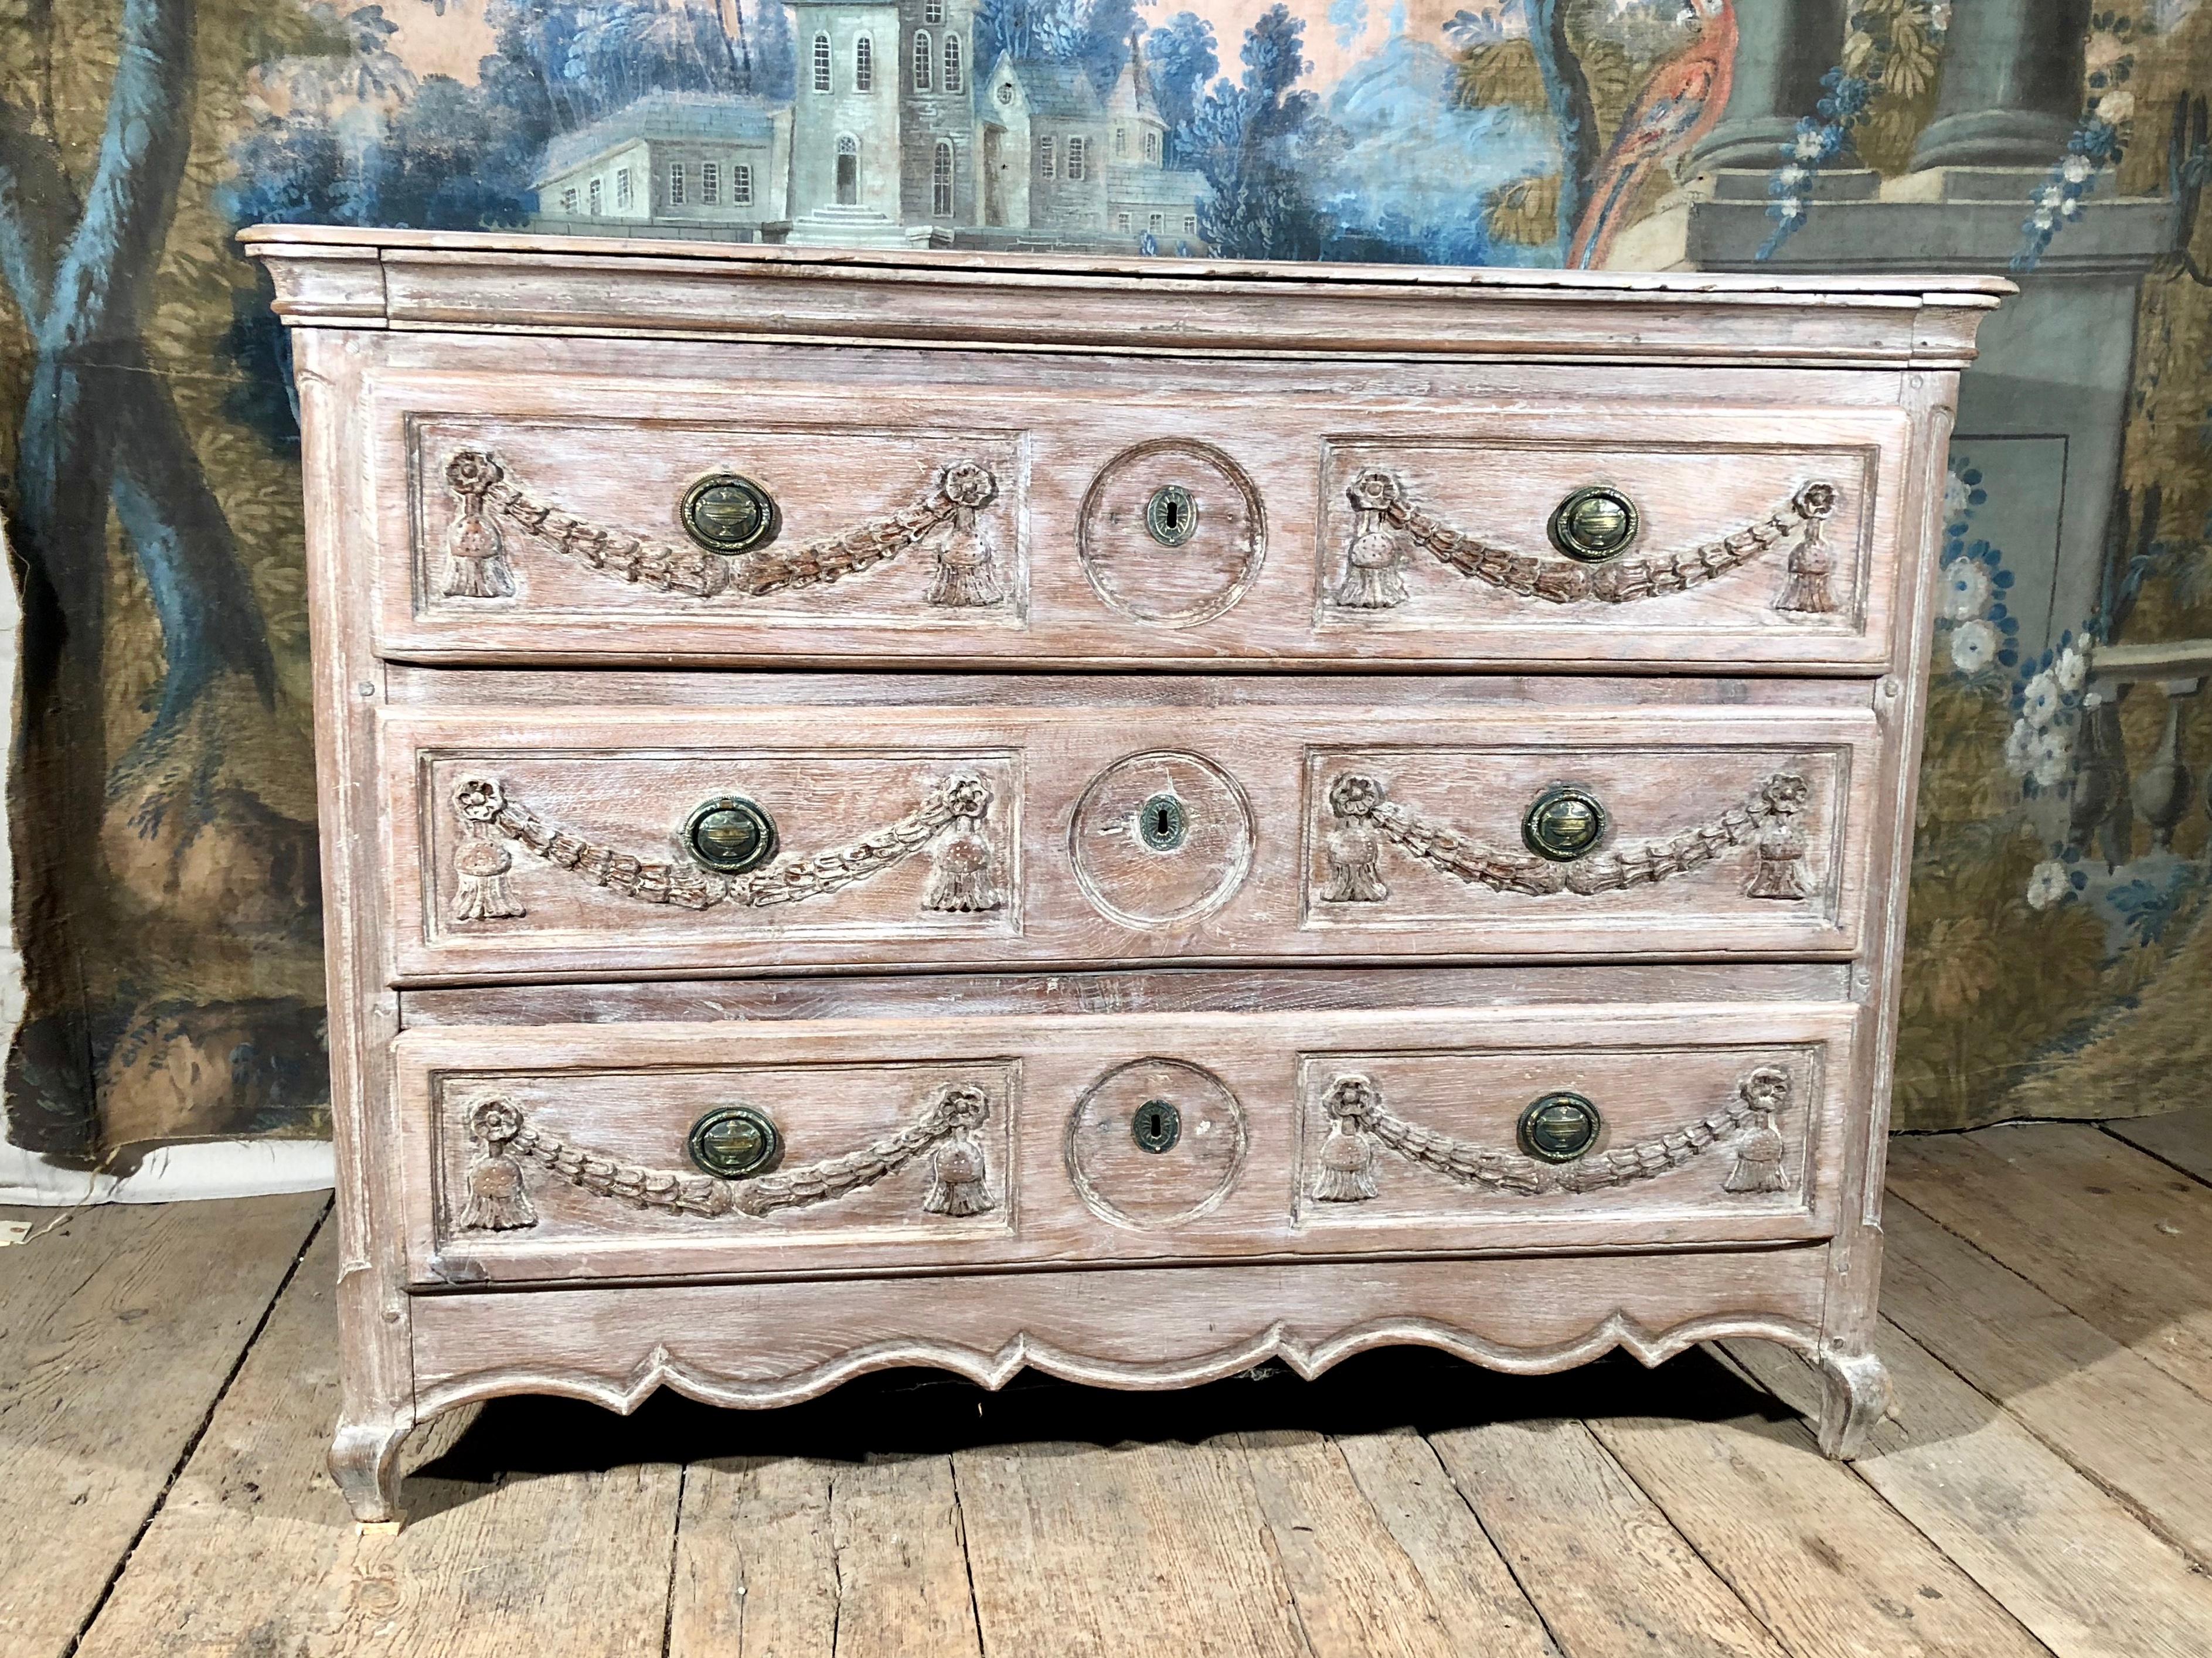 A late 18th century three-drawer commode in bleached oak, with its original wood top and brass drawer pulls, transitional Louis XV-Louis XVI, with wonderful garland carvings on drawer fronts, circa 1780.